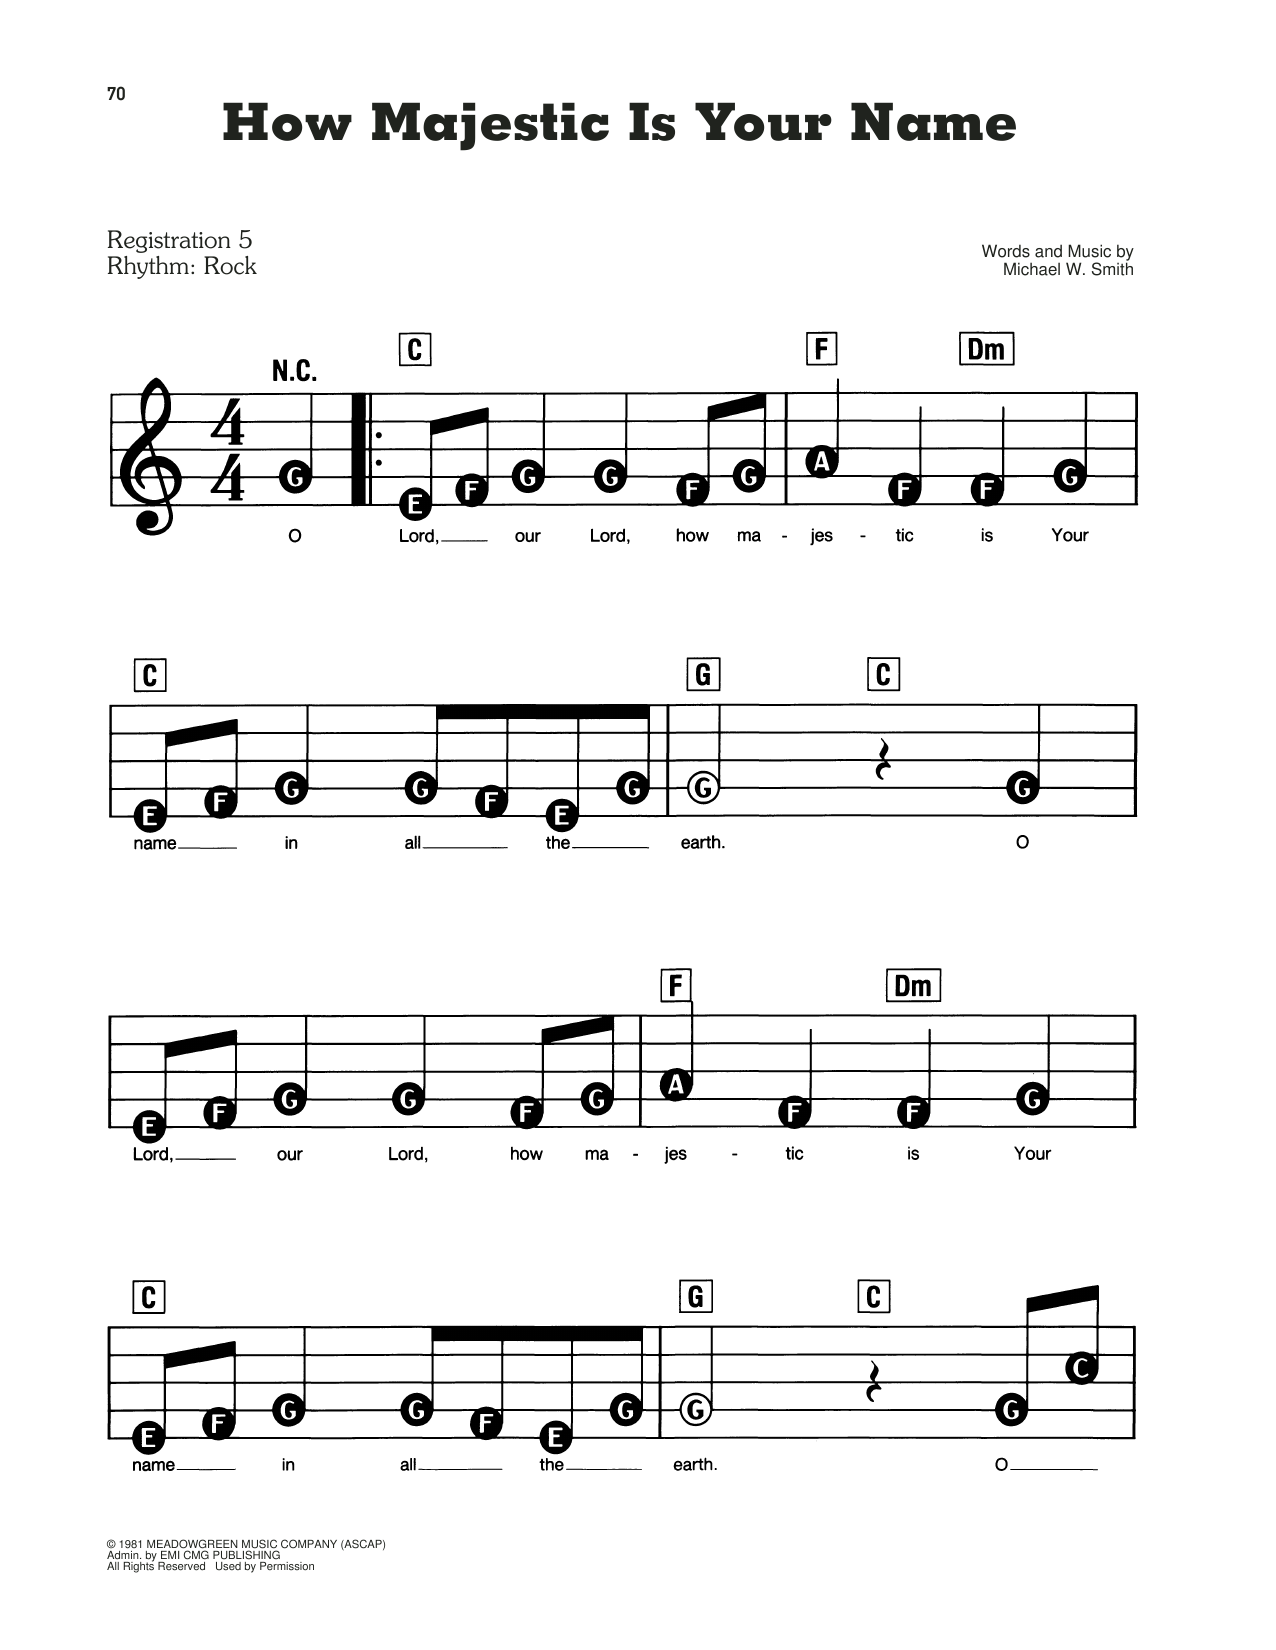 Michael W. Smith "How Majestic Is Your Name" Sheet Music Notes